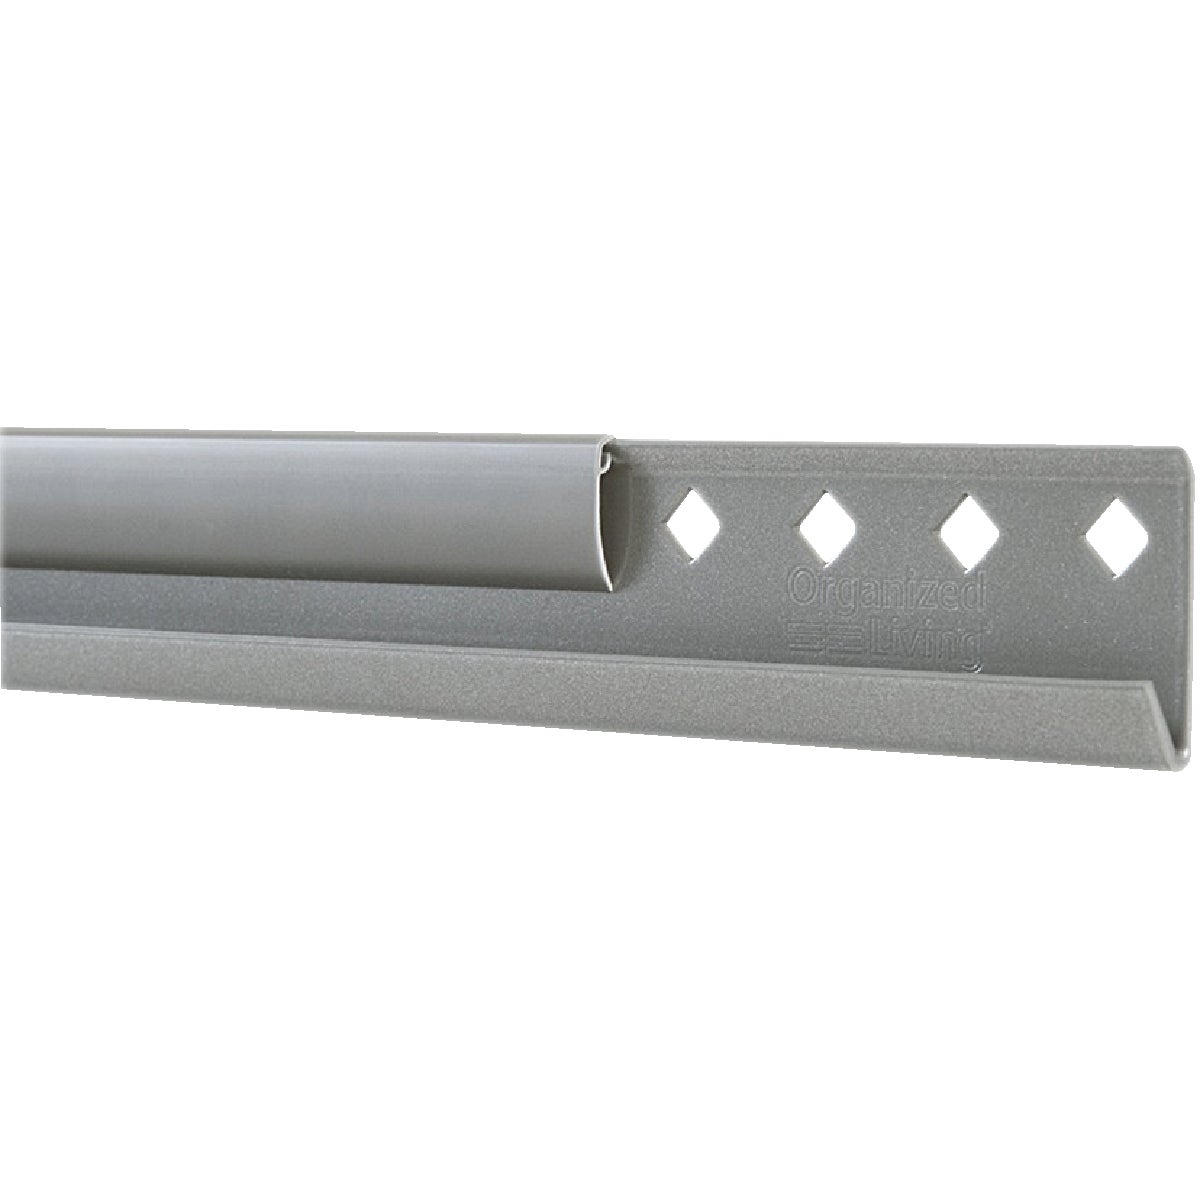 FreedomRail 24 In. Nickel Horizontal Hanging Rail with Cover